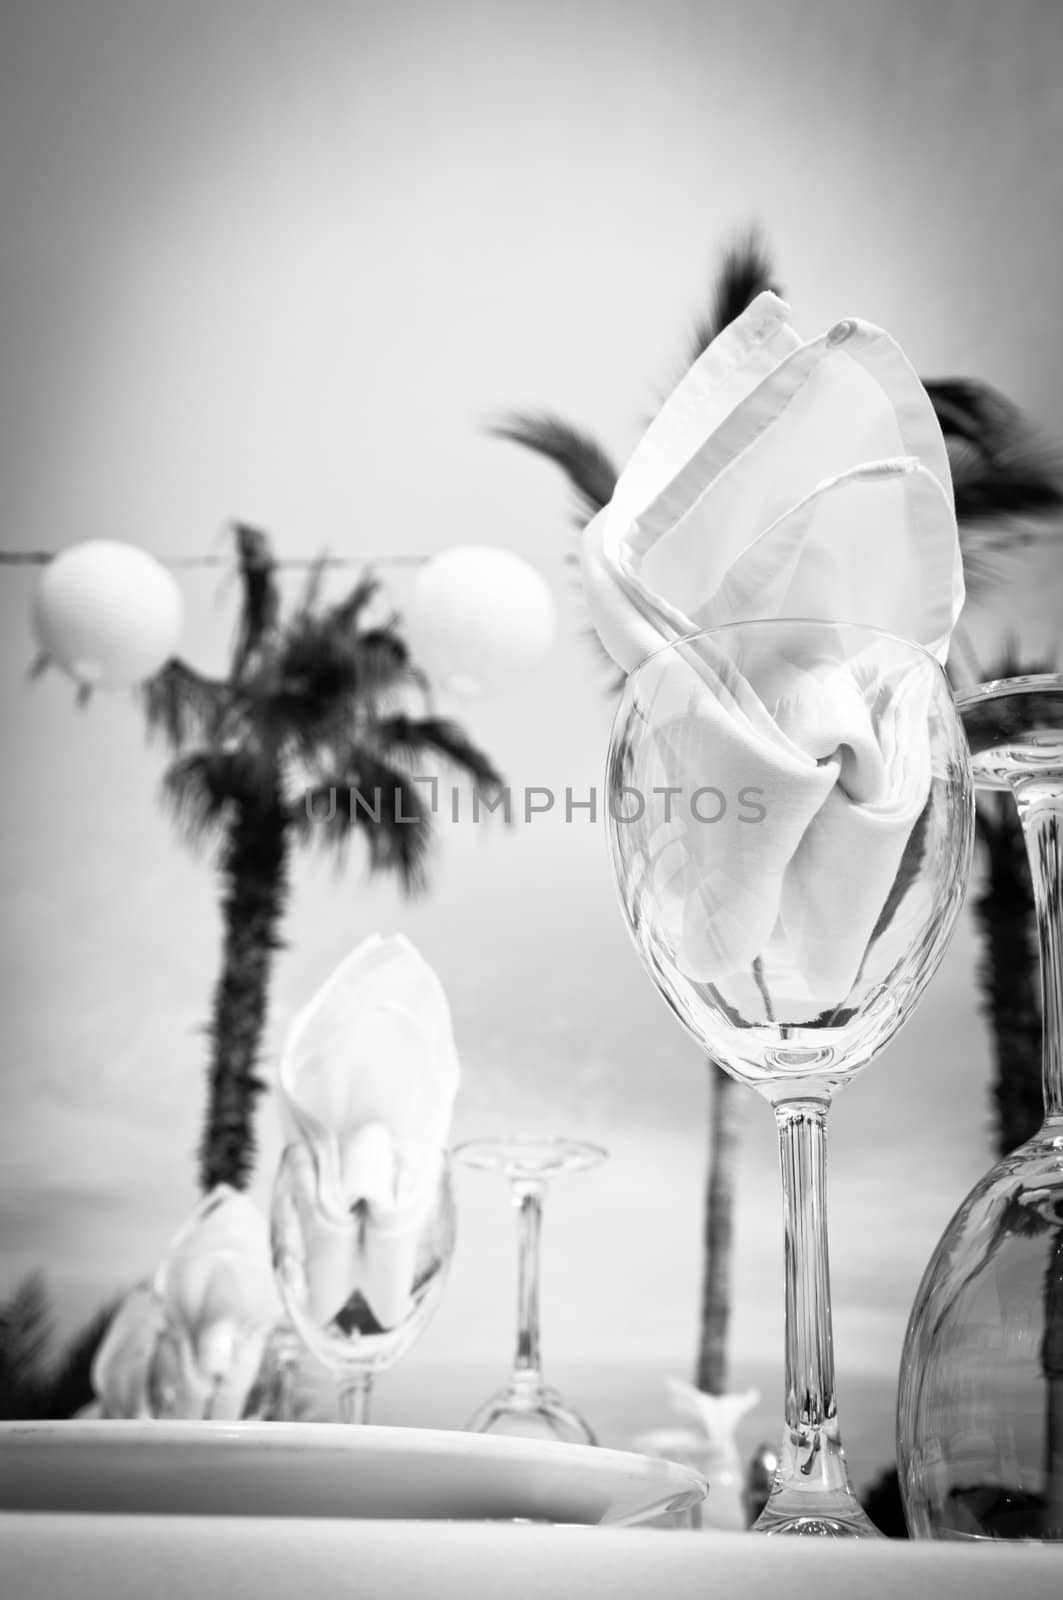 Black & white close-up of wine glasses at a wedding reception somewhere tropical with palm trees in the background.